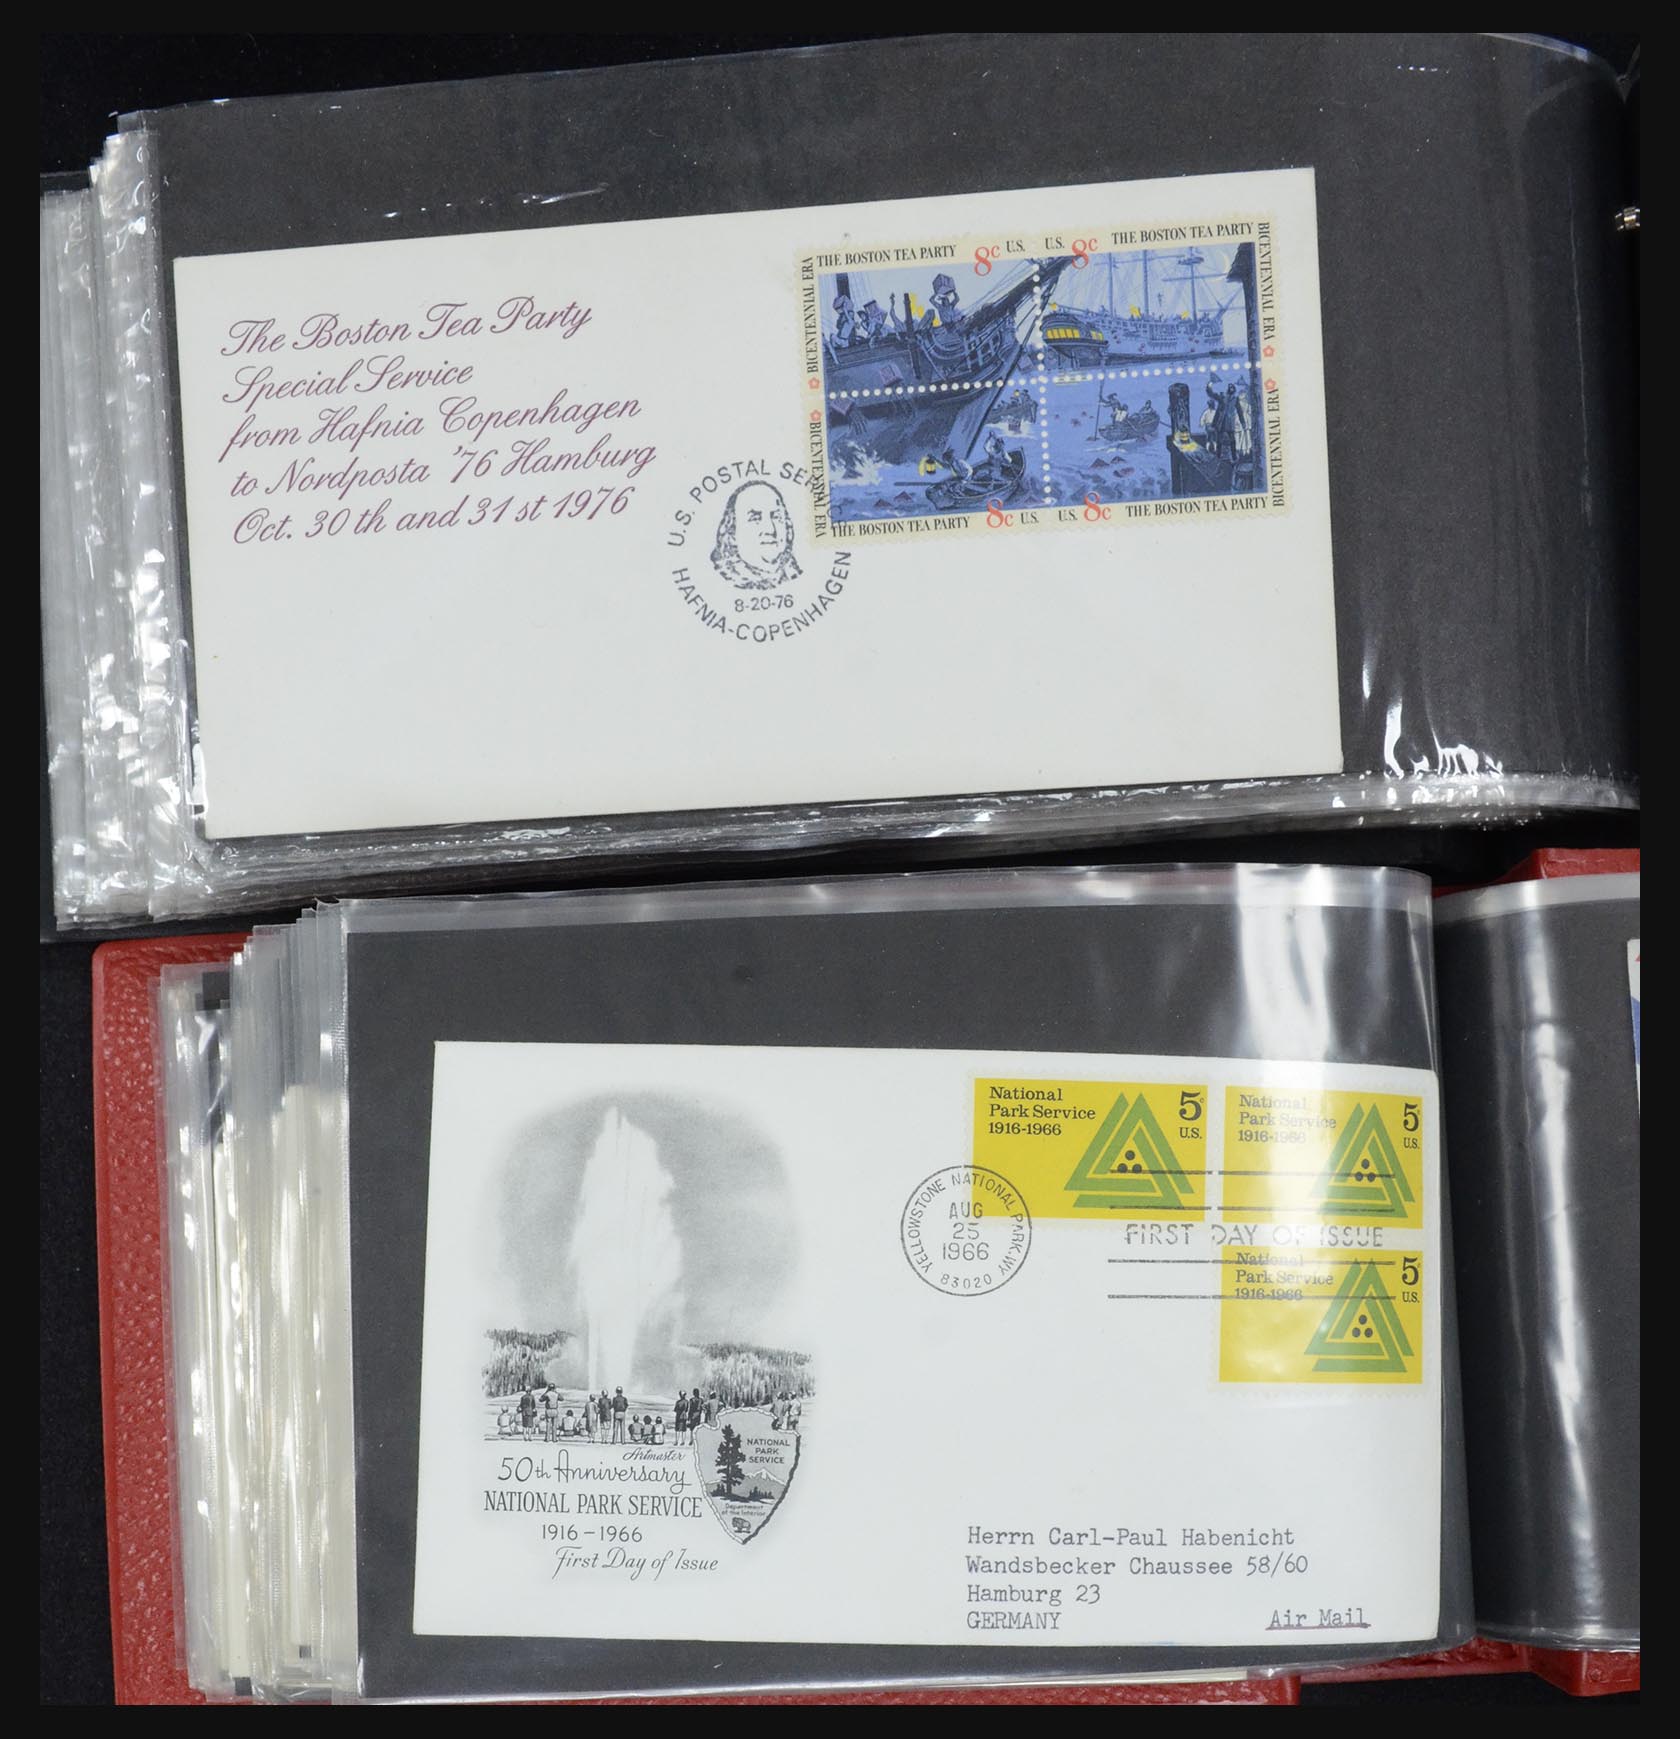 31913 1934 - 31913 USA fdc-collectie 1945-1990.